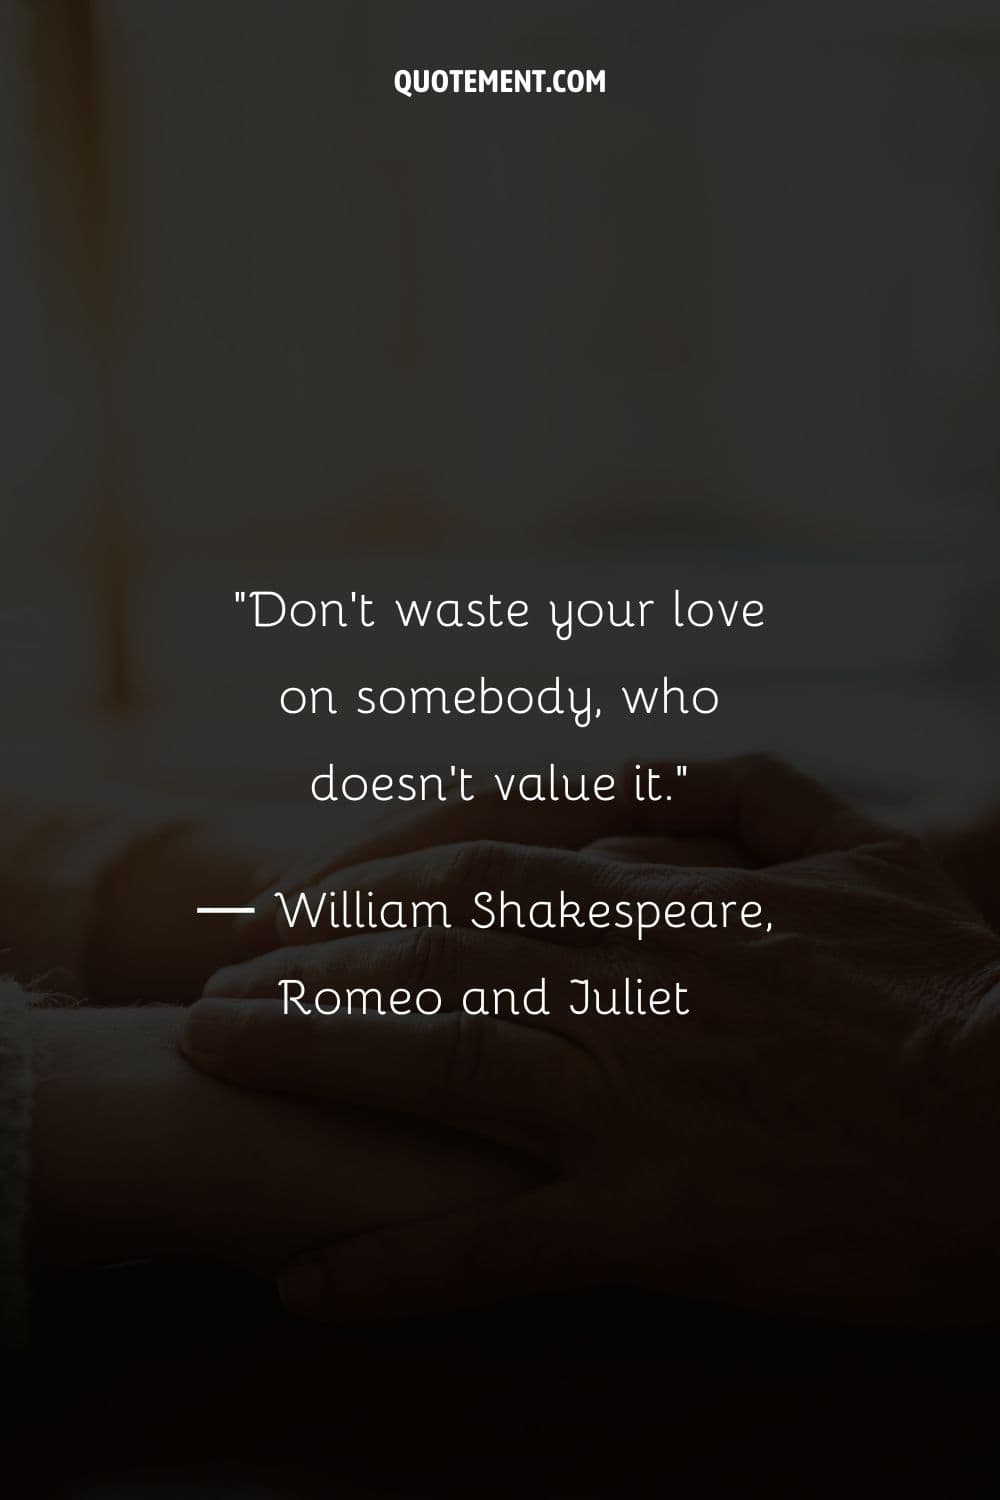 Don't waste your love on somebody, who doesn't value it